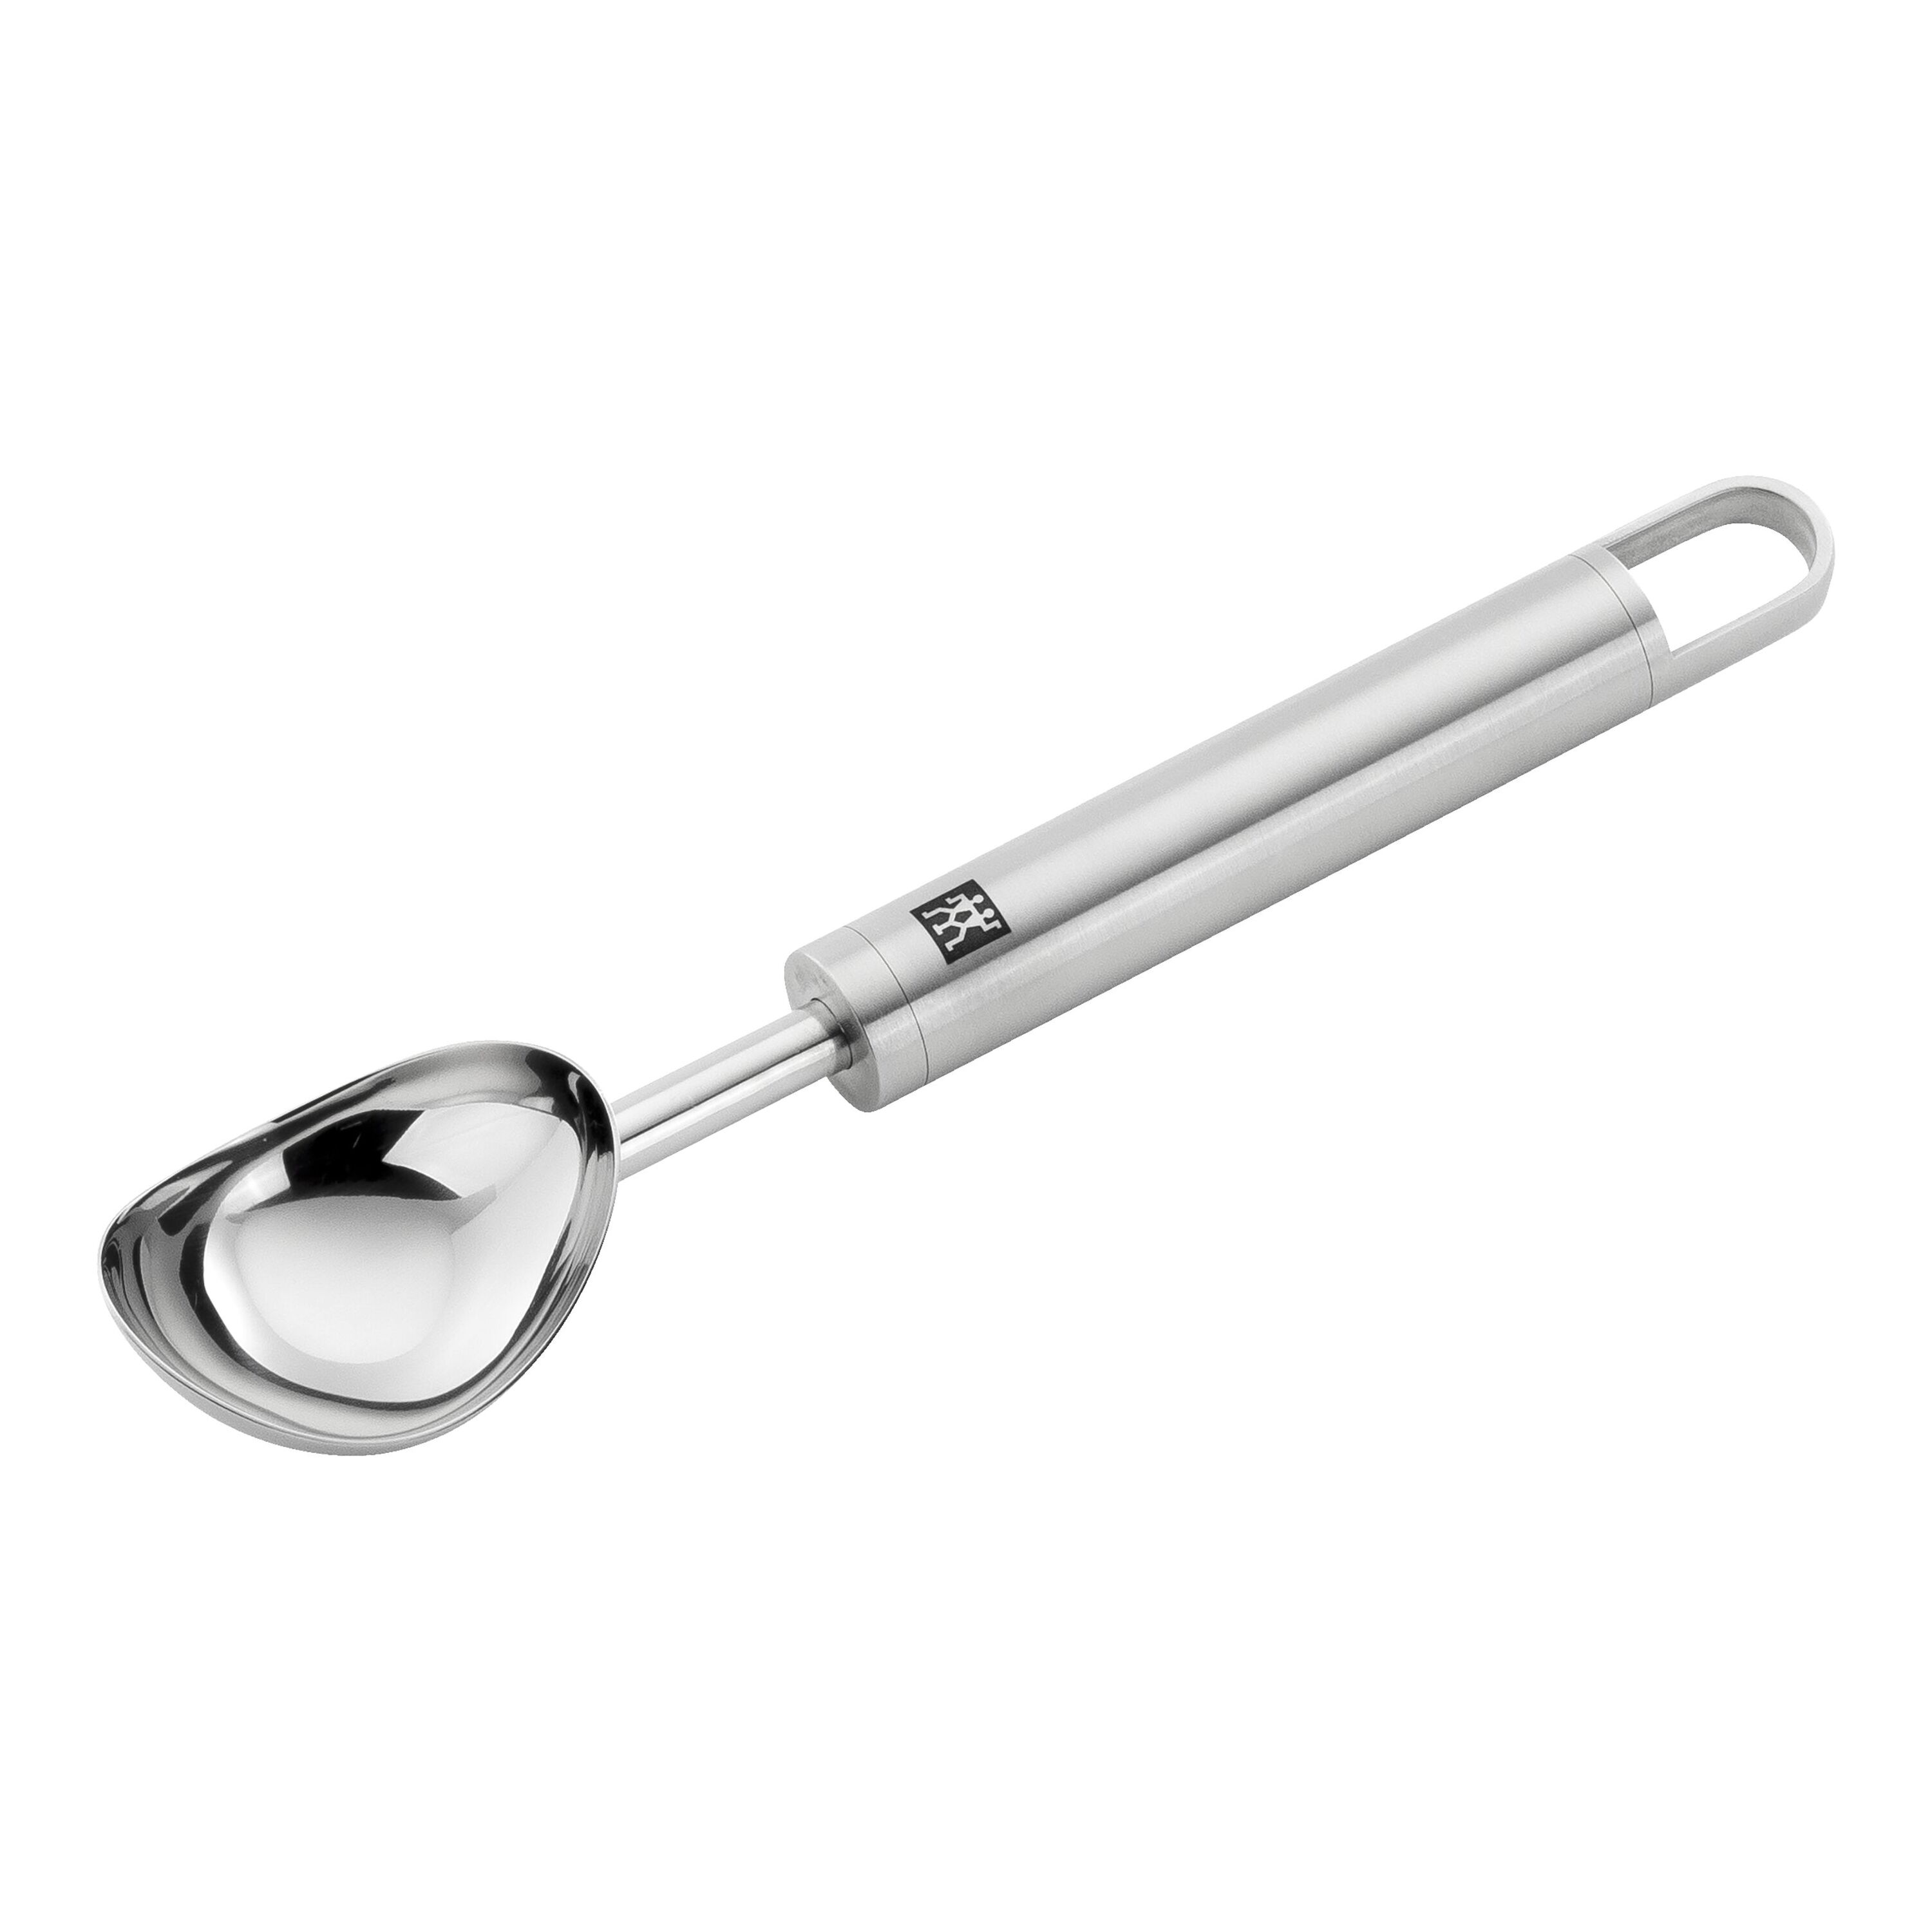 Good Cook Touch Ice Cream Scoop, Gagets